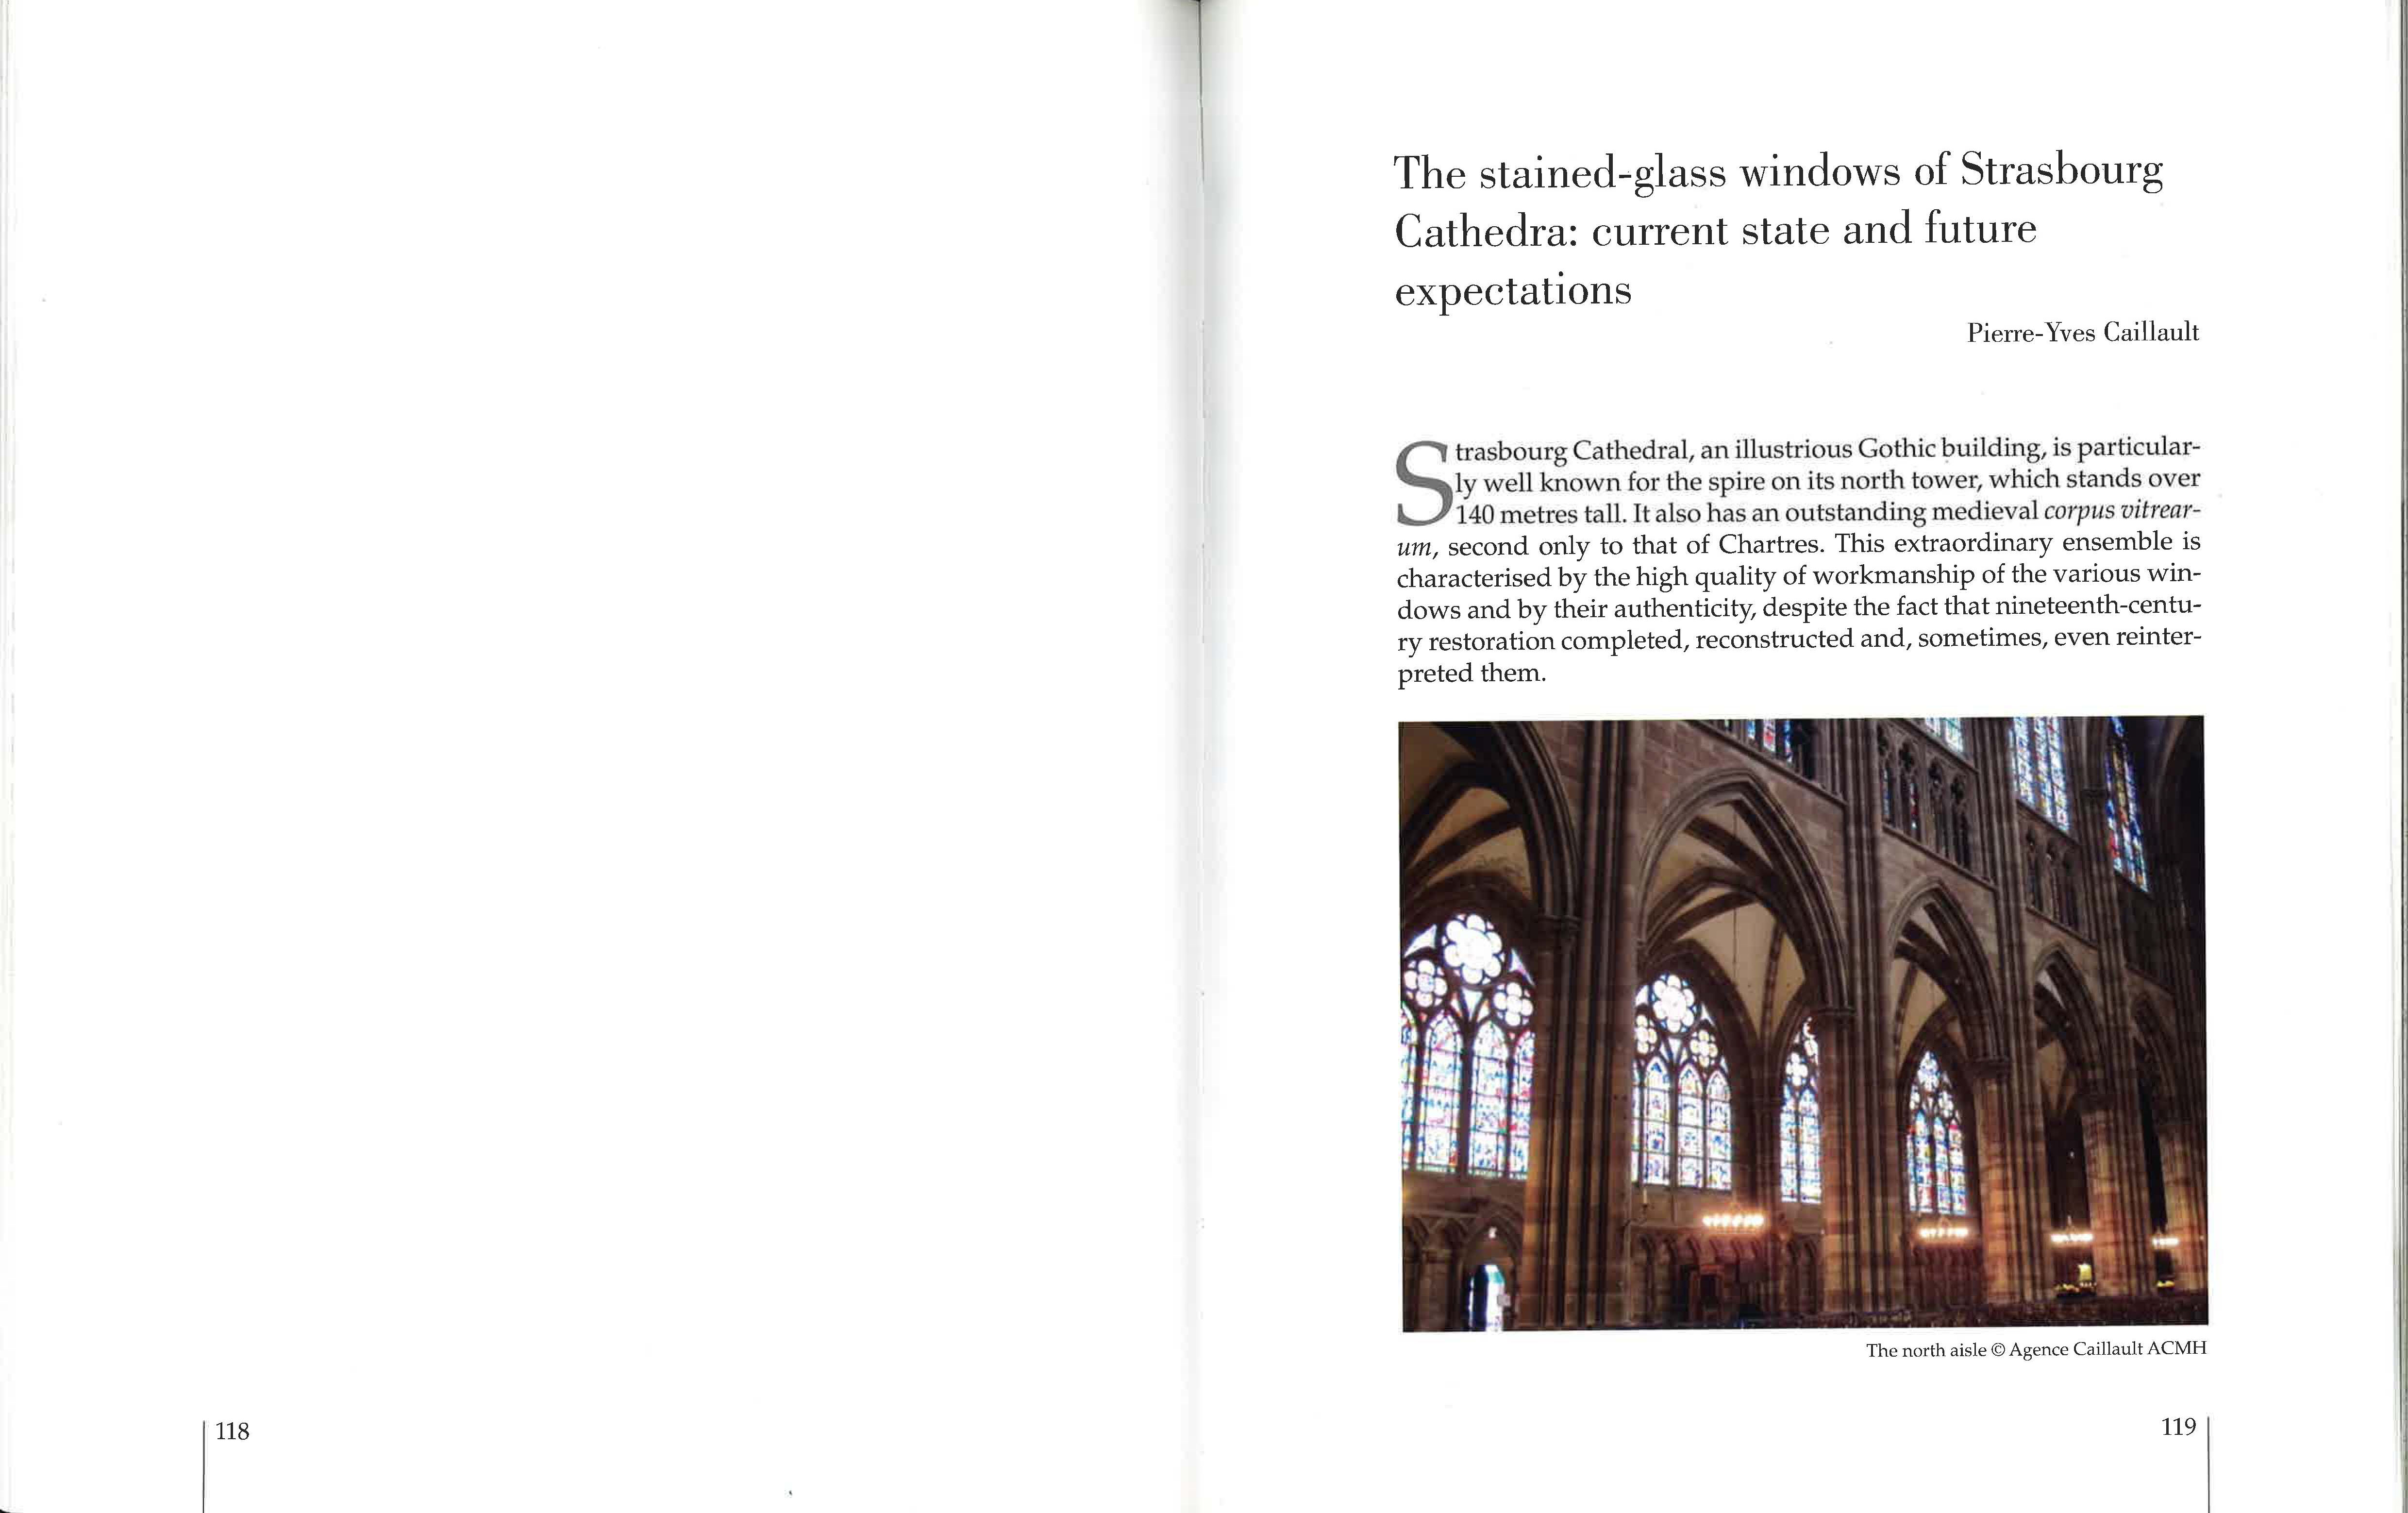 European catheadrals_The stained-glass windows of Strasbourg Cathedra – current state and future expectations_Page_2